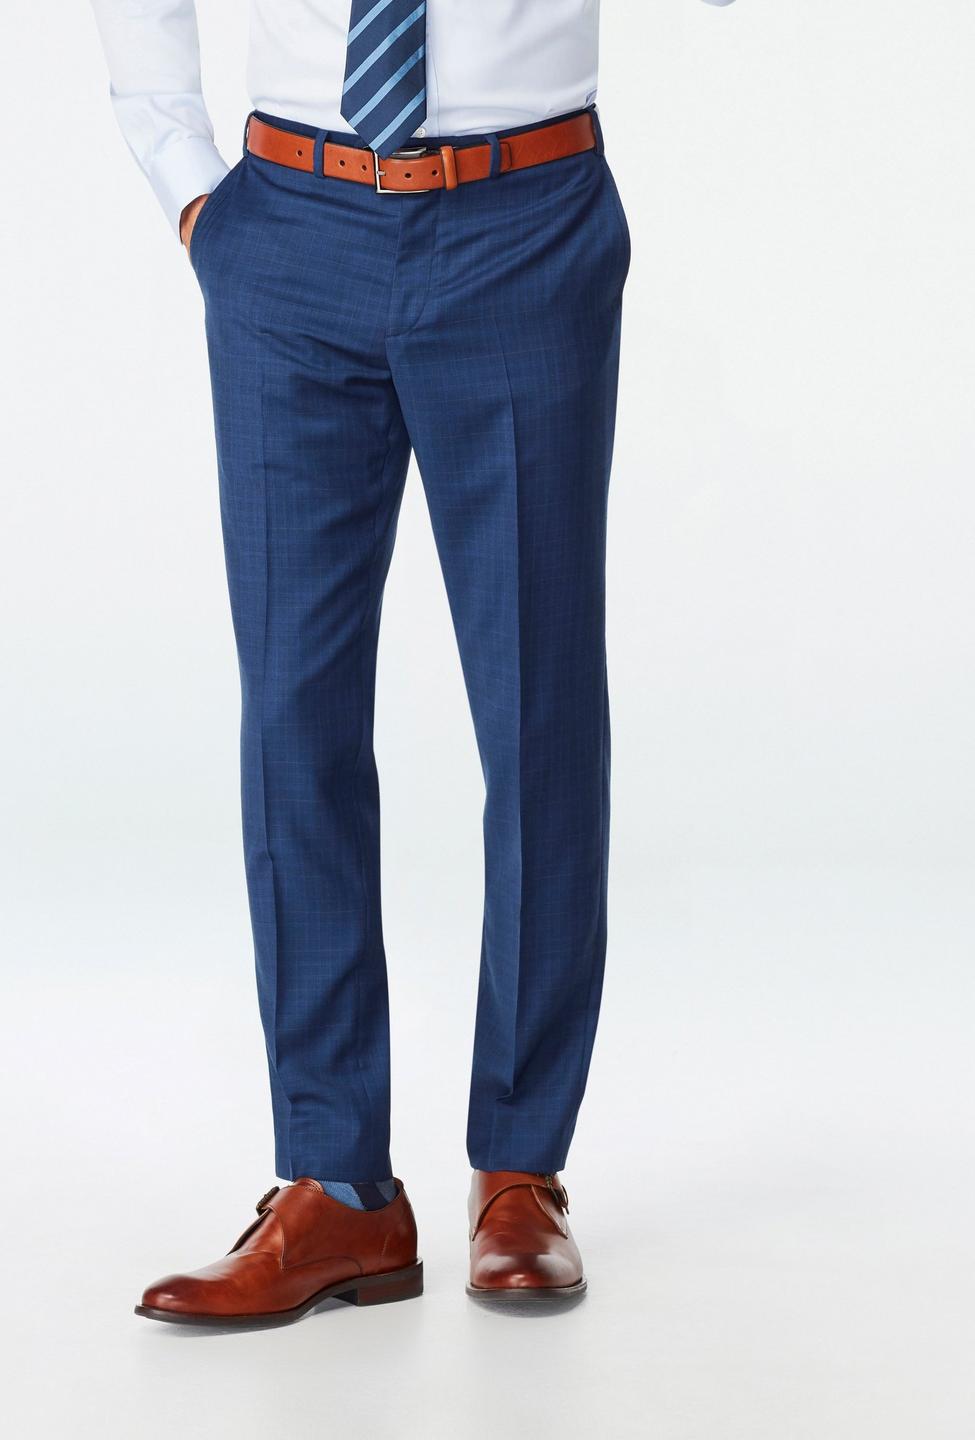 Blue pants - Harrogate Checked Design from Luxury Indochino Collection